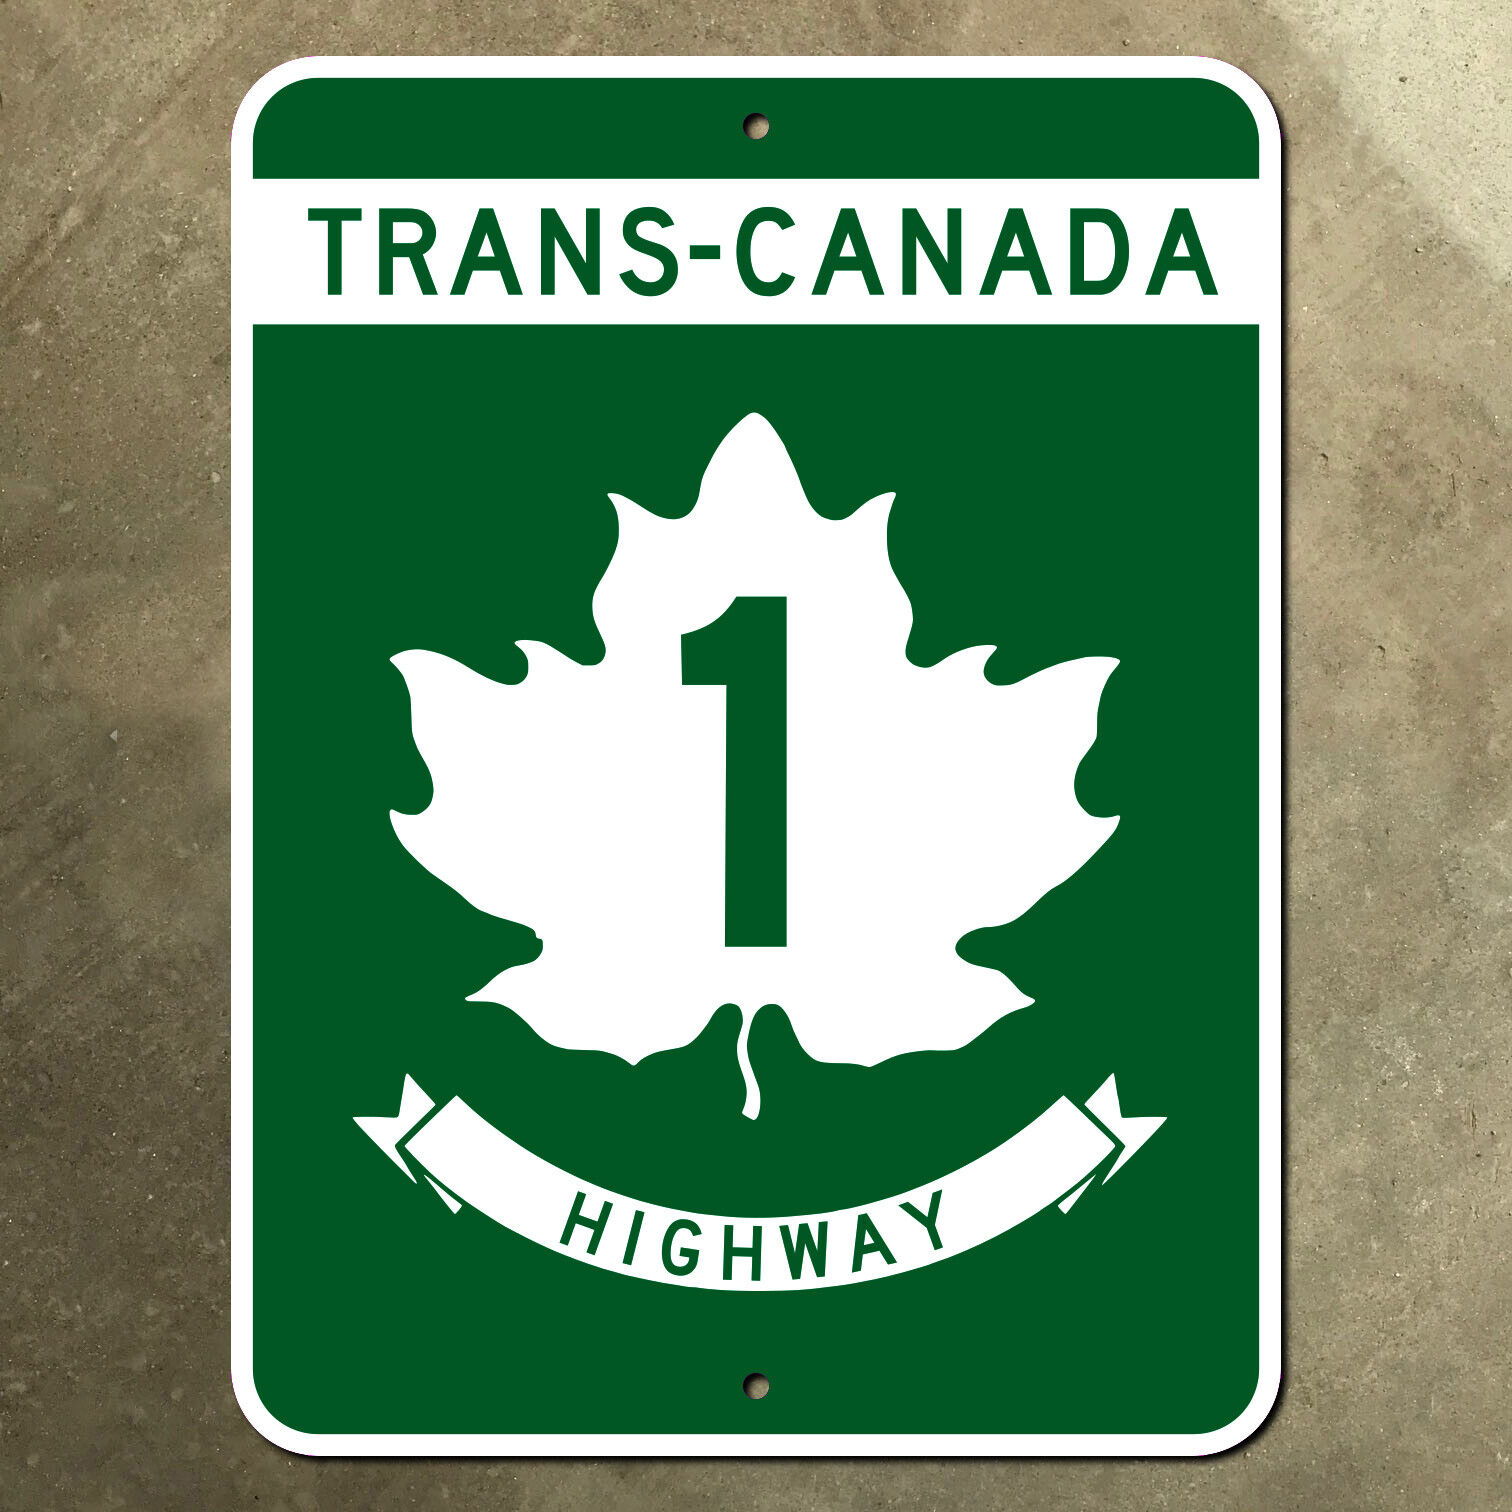 Trans-Canada highway 1 route marker road sign 1972 15x20